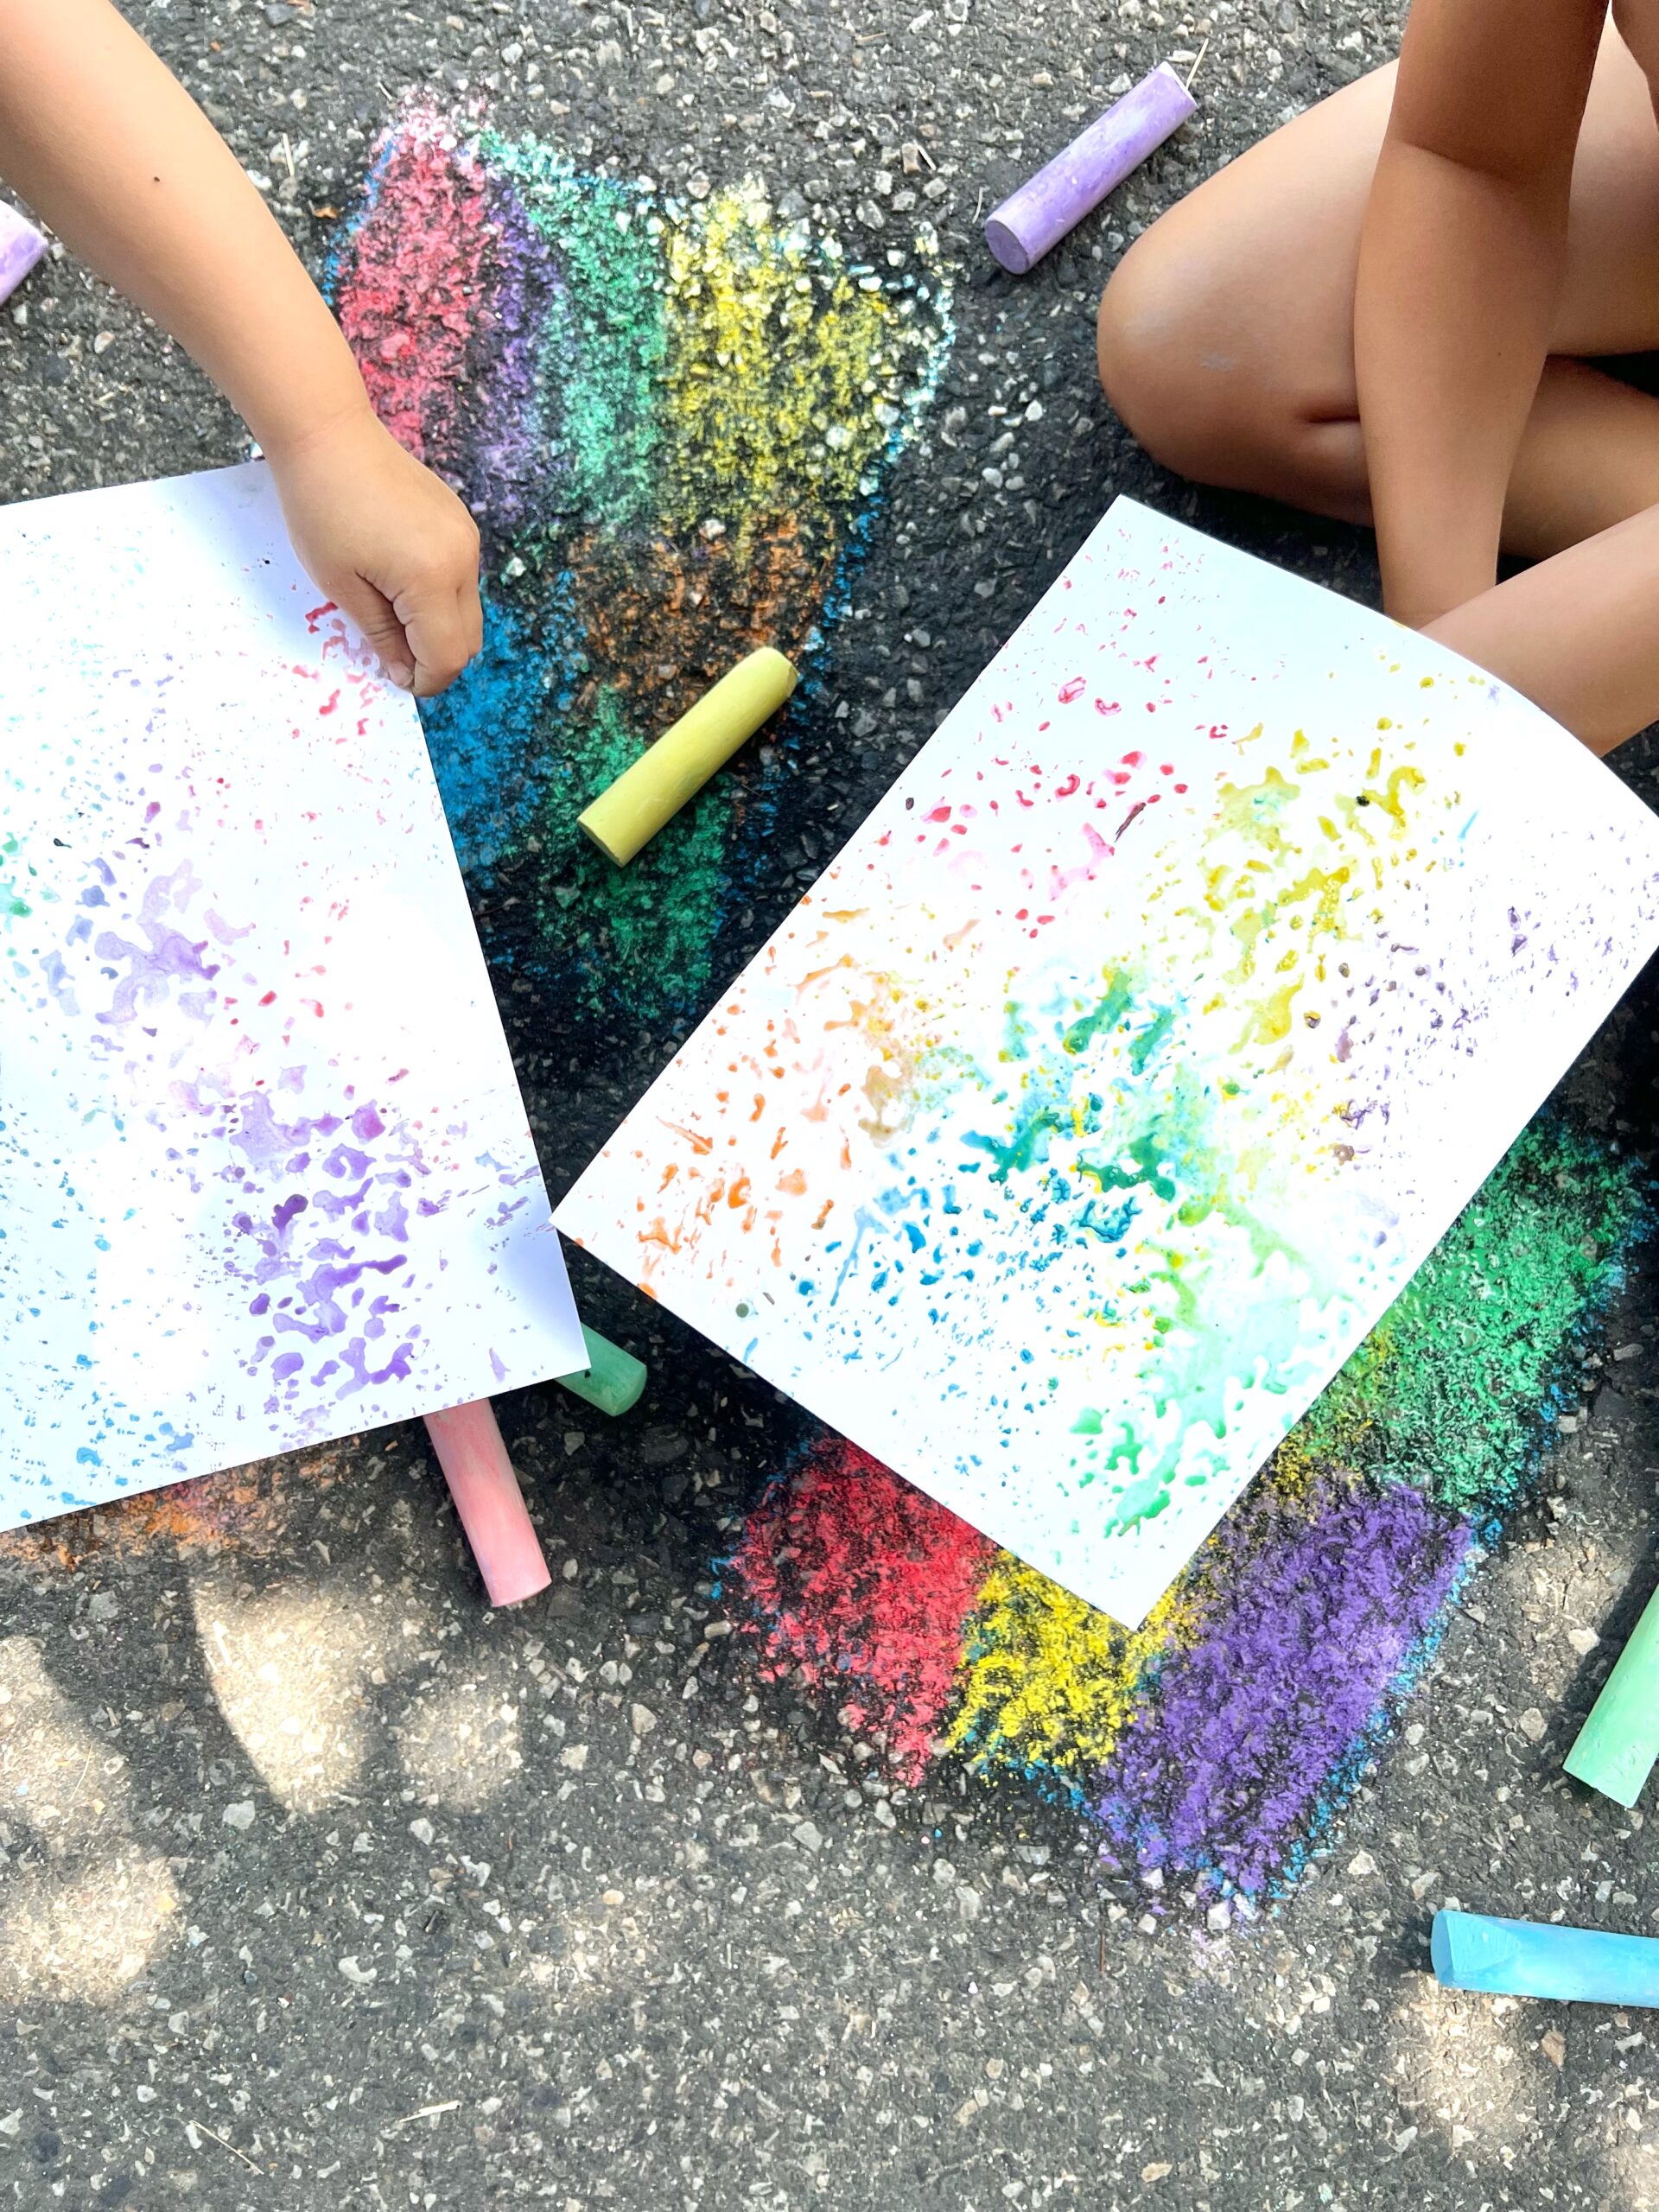 Kids Printmaking with Sidewalk Chalk. Holding colorful Monoprints on paper complete guide to process art for preschoolers